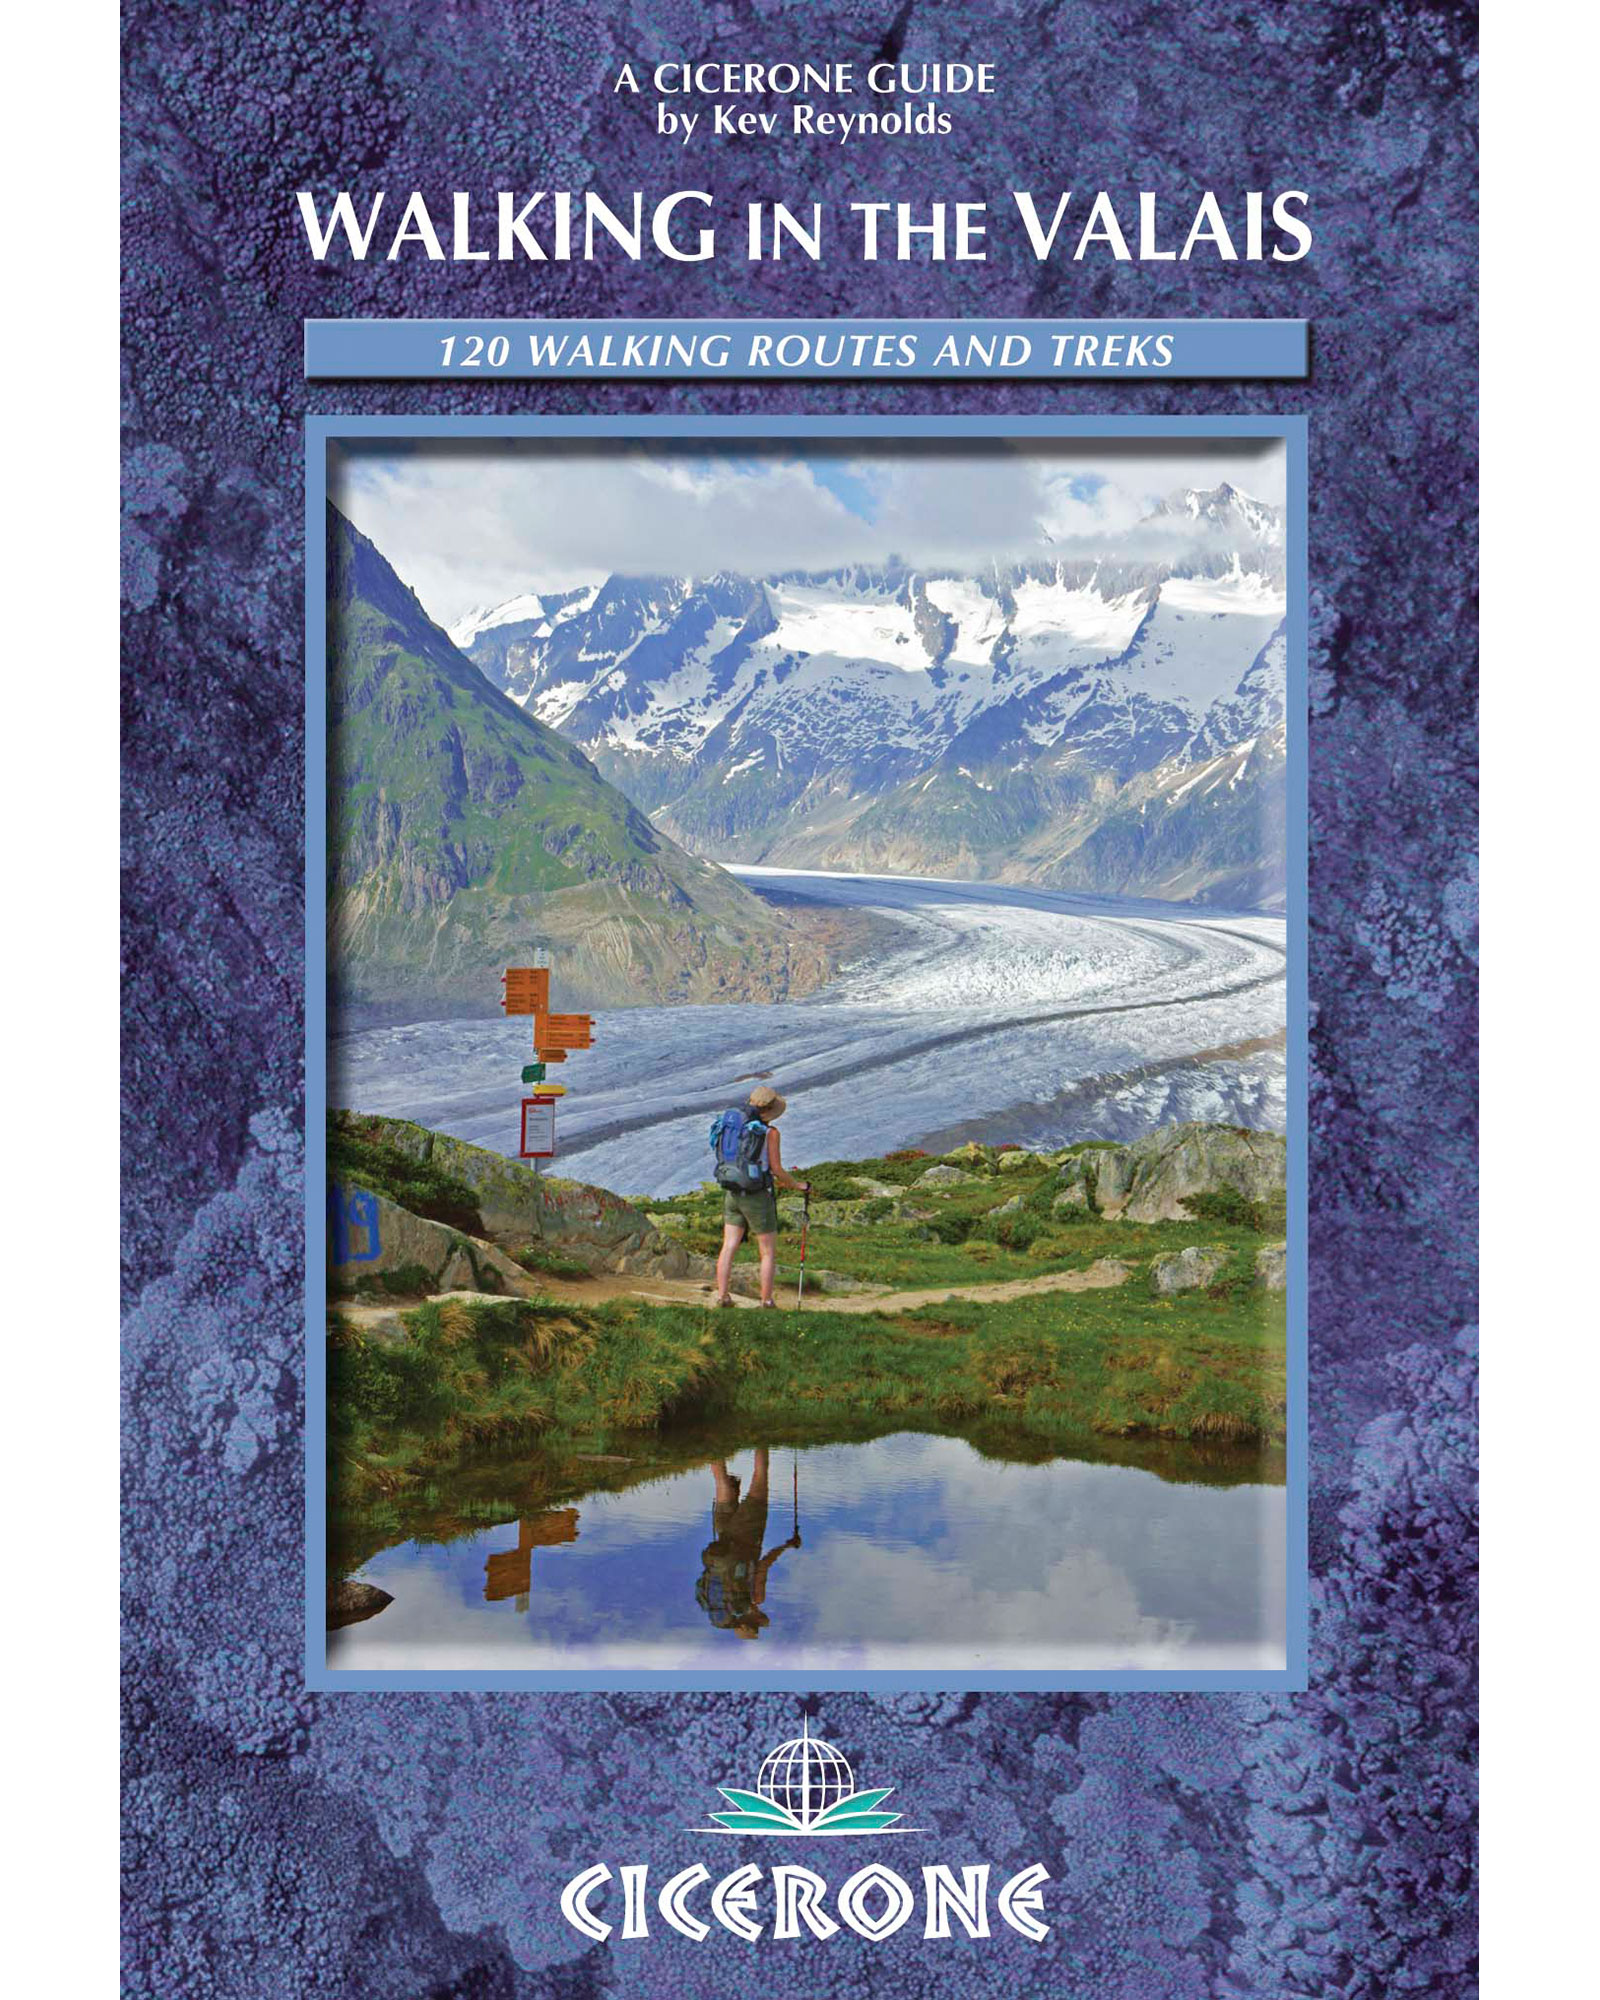 Cicerone Walking In The Valais Switzerland Guide Book